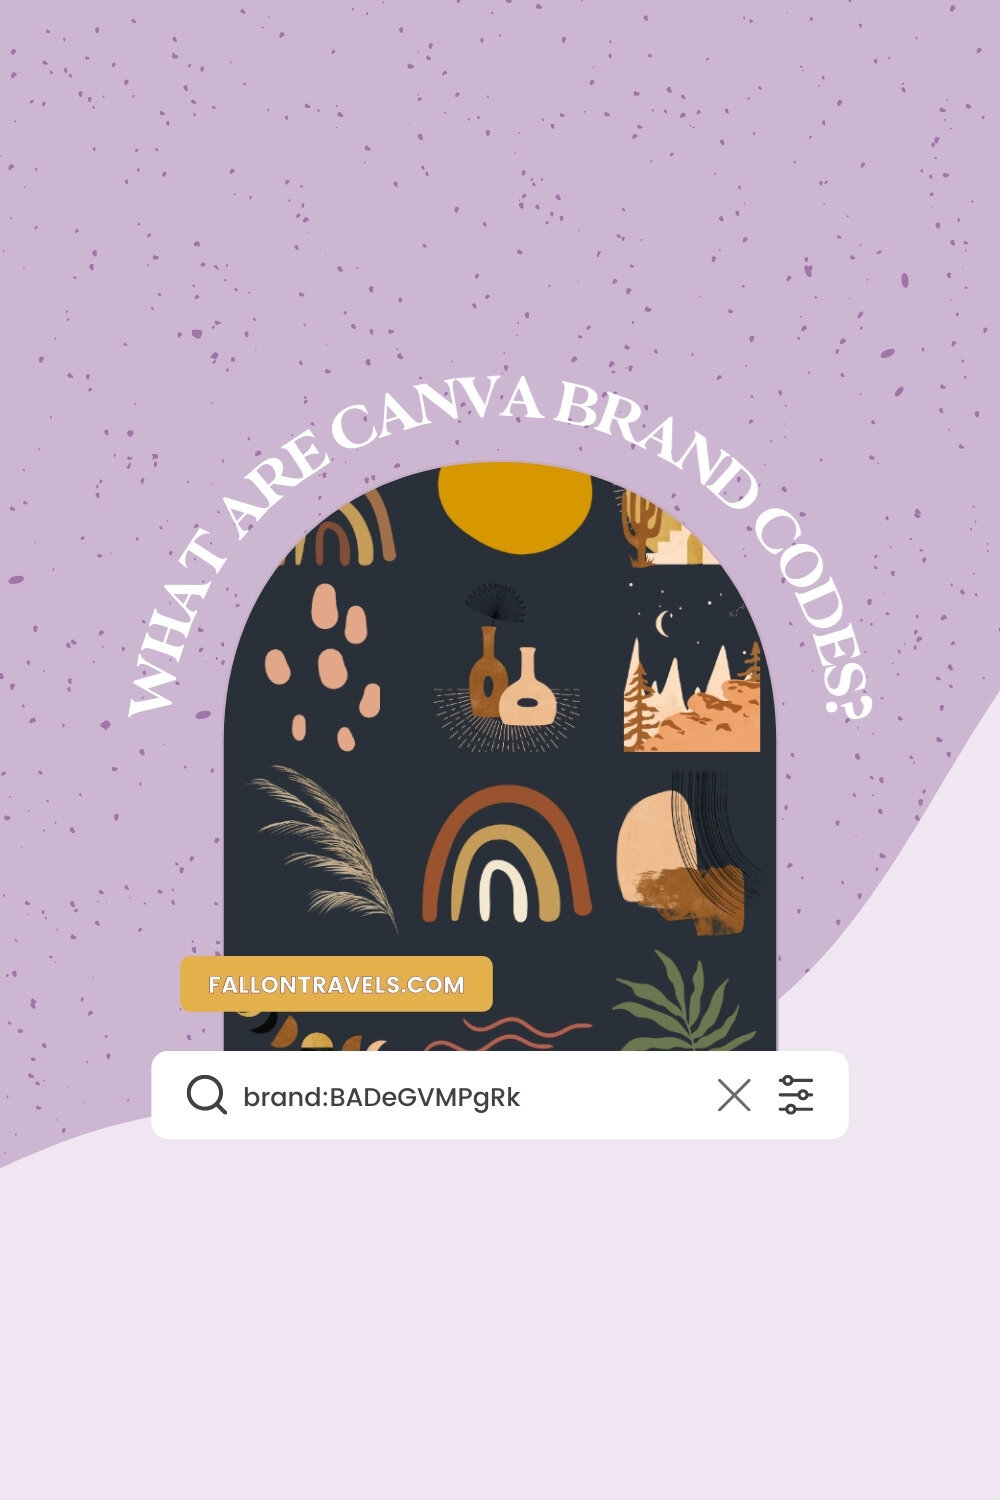 How to use Canva Brand Codes to Uncover Secret Design Elements | Fallon Travels